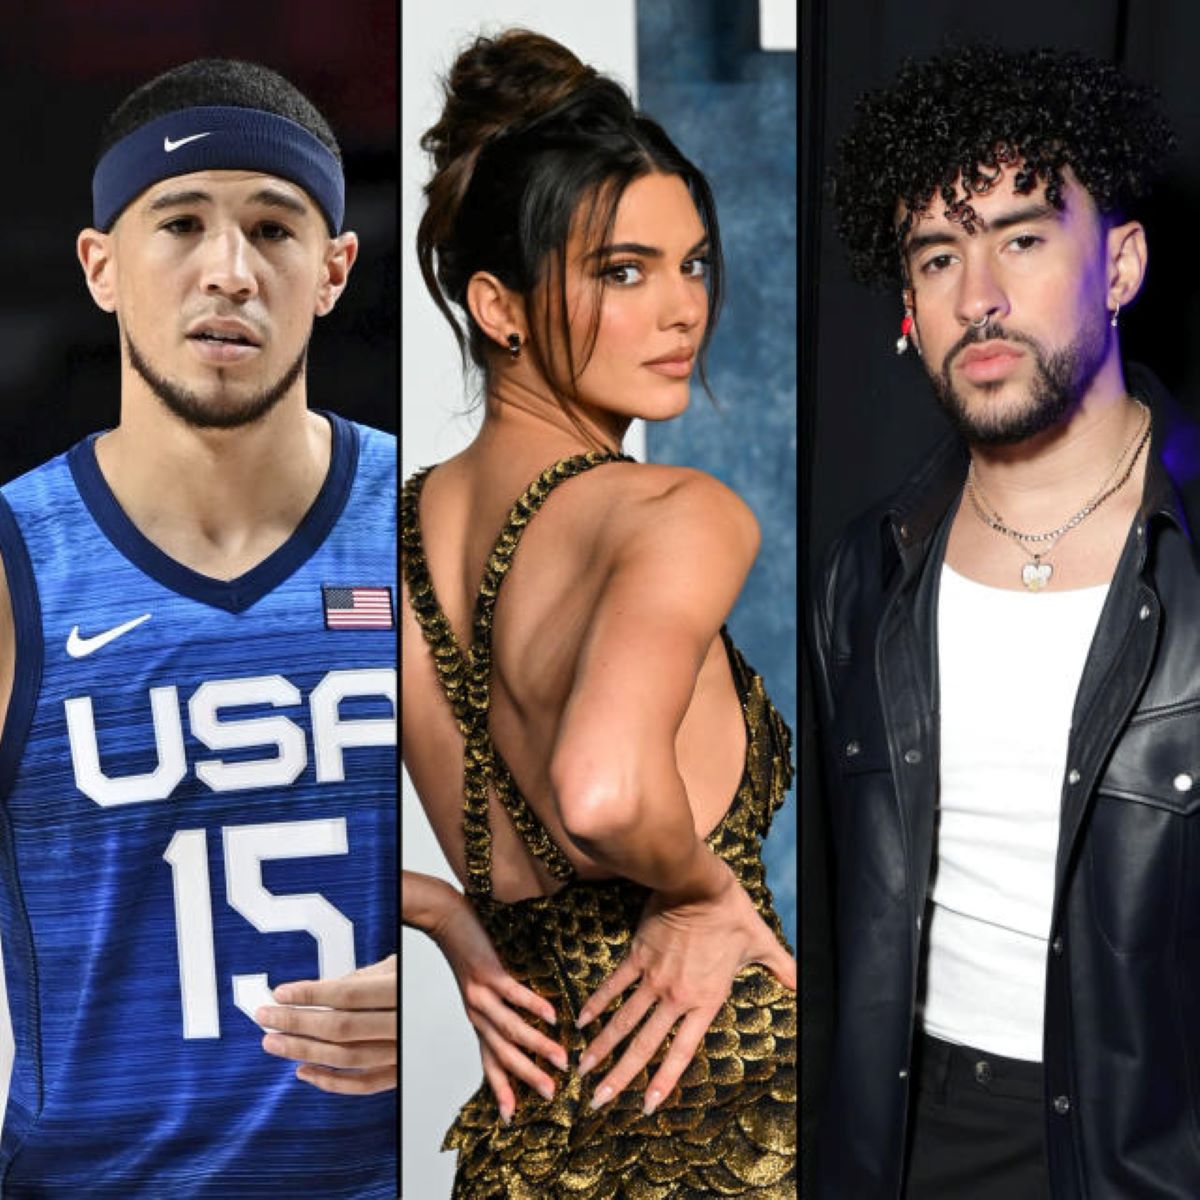 Devin Booker Spotted In Kendall Jenner’s Super Bowl Suite, Bad Bunny Elsewhere